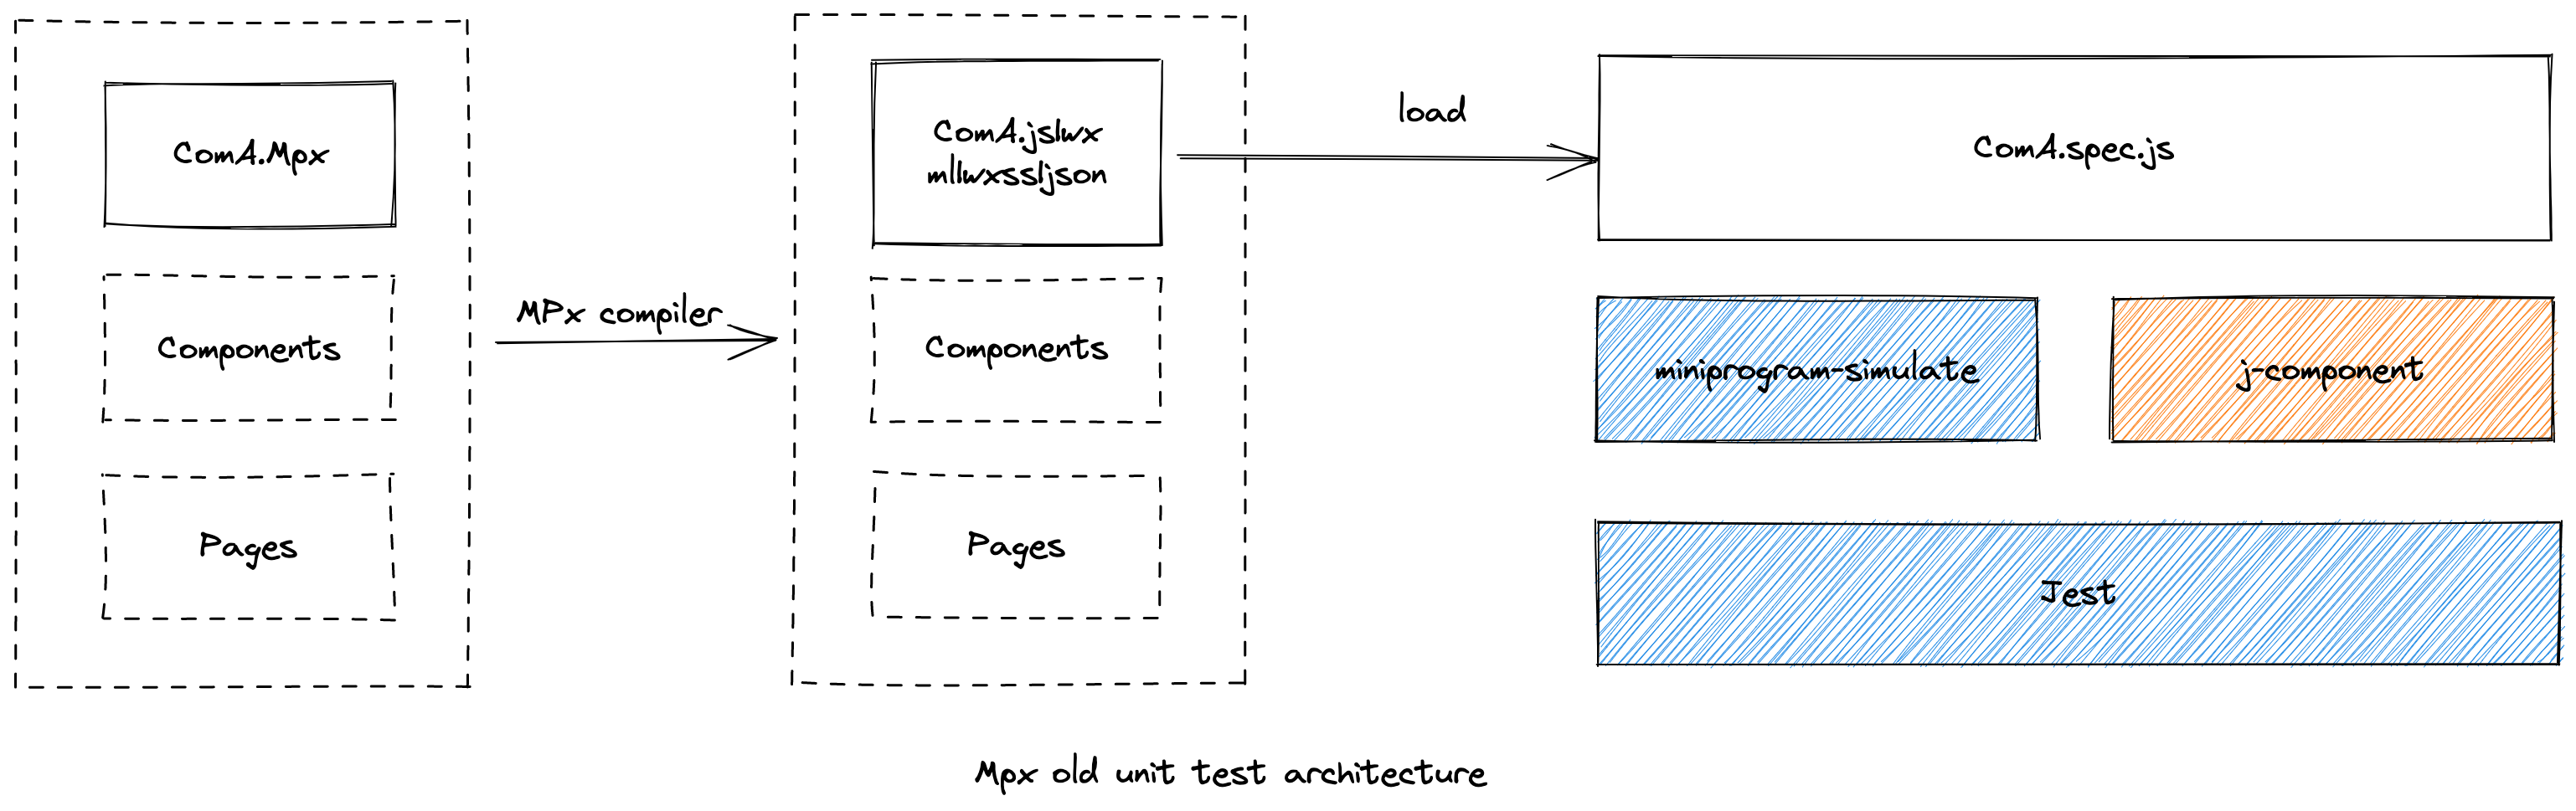 mpx-old-unit-test-architecture.png